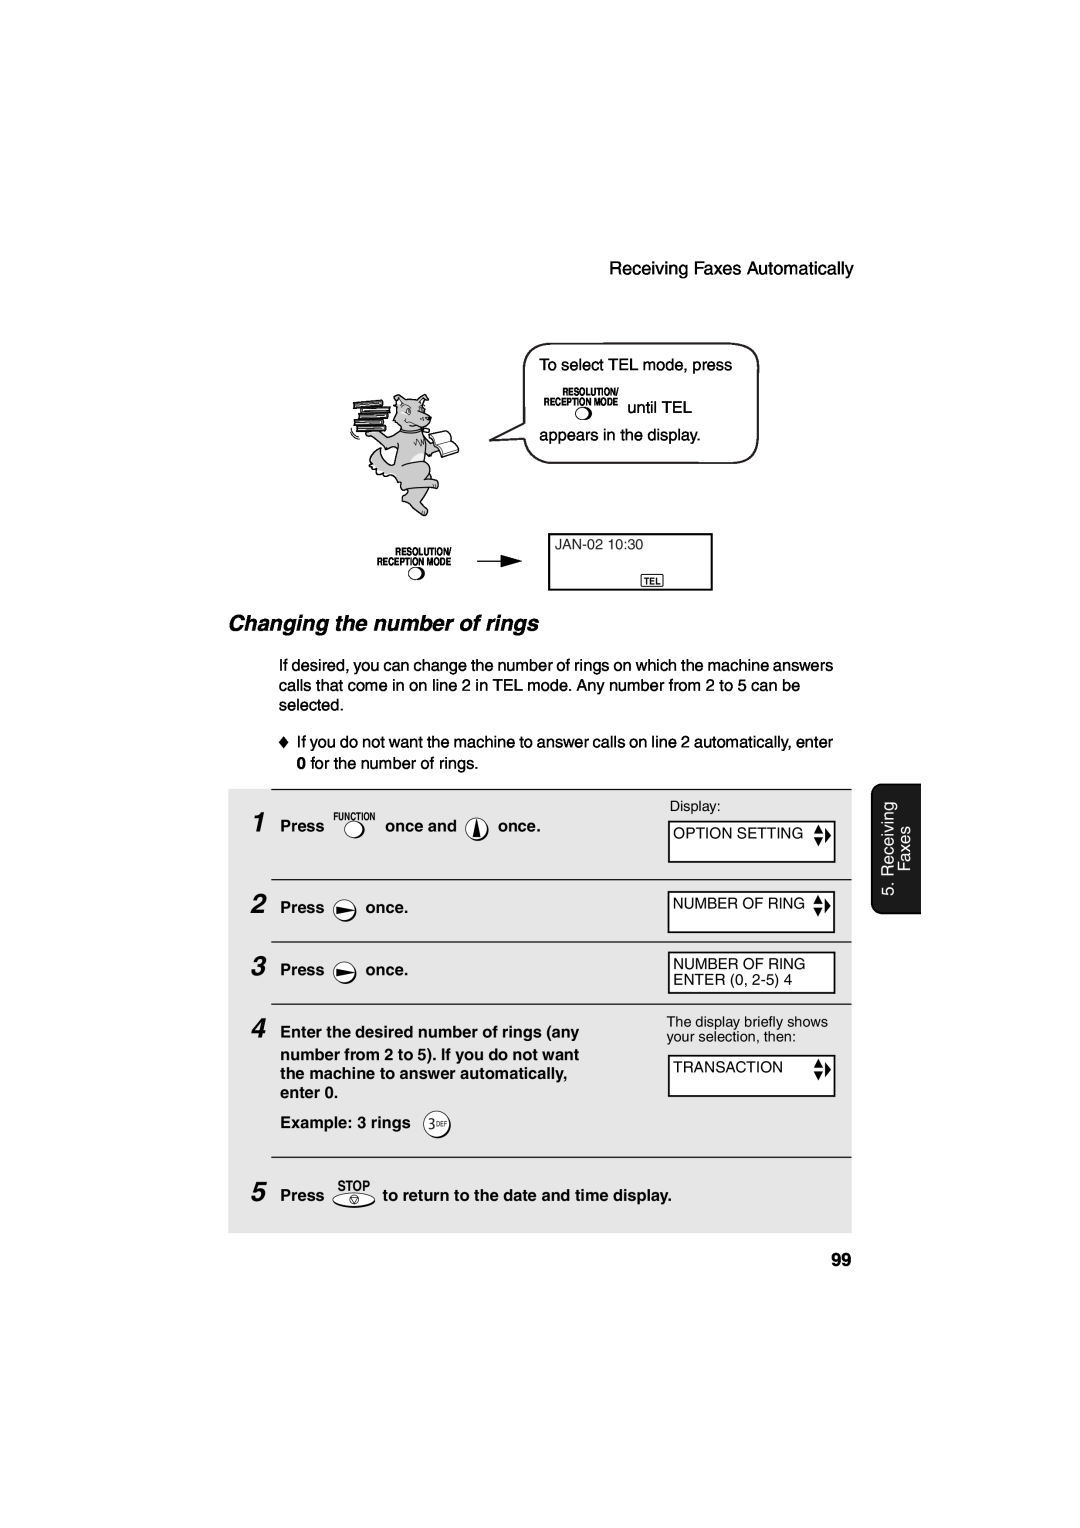 Sharp UX-CD600 operation manual Changing the number of rings, Receiving Faxes Automatically 